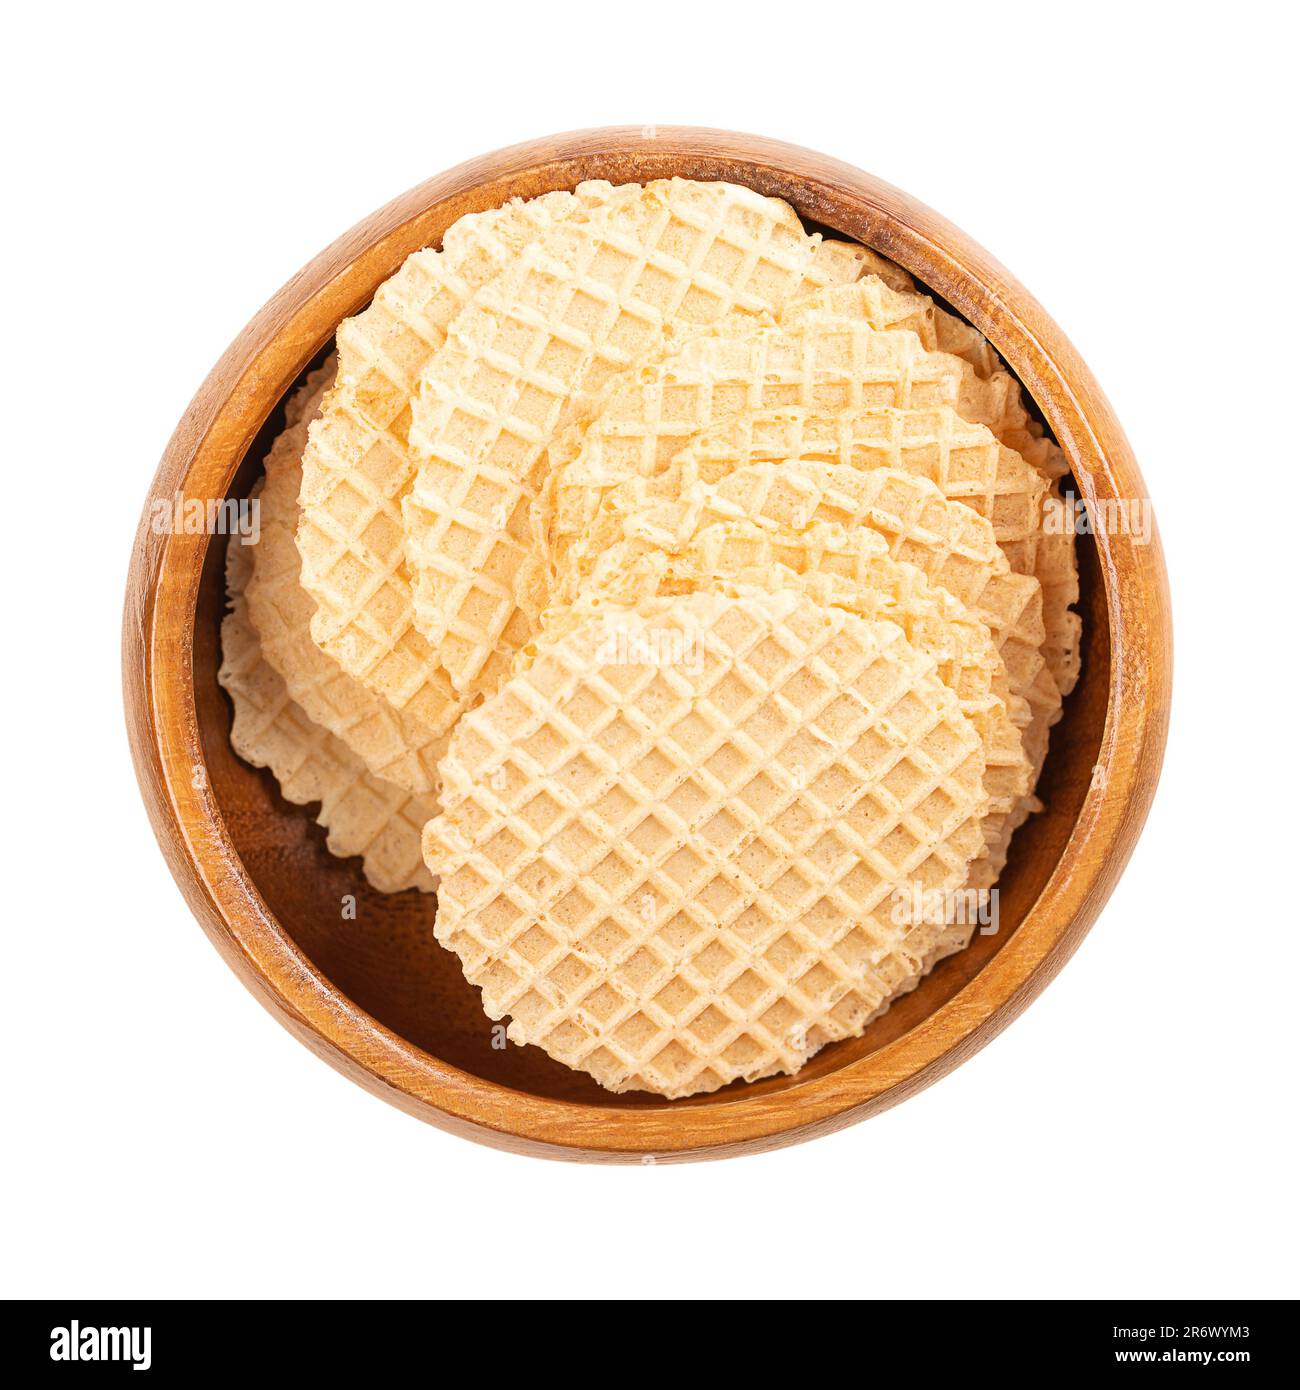 Cheese cracker in a wooden bowl. Snack in the shape of circular and wafer-thin slices, made of dough of wheat flour and cheese, baked crispy. Stock Photo